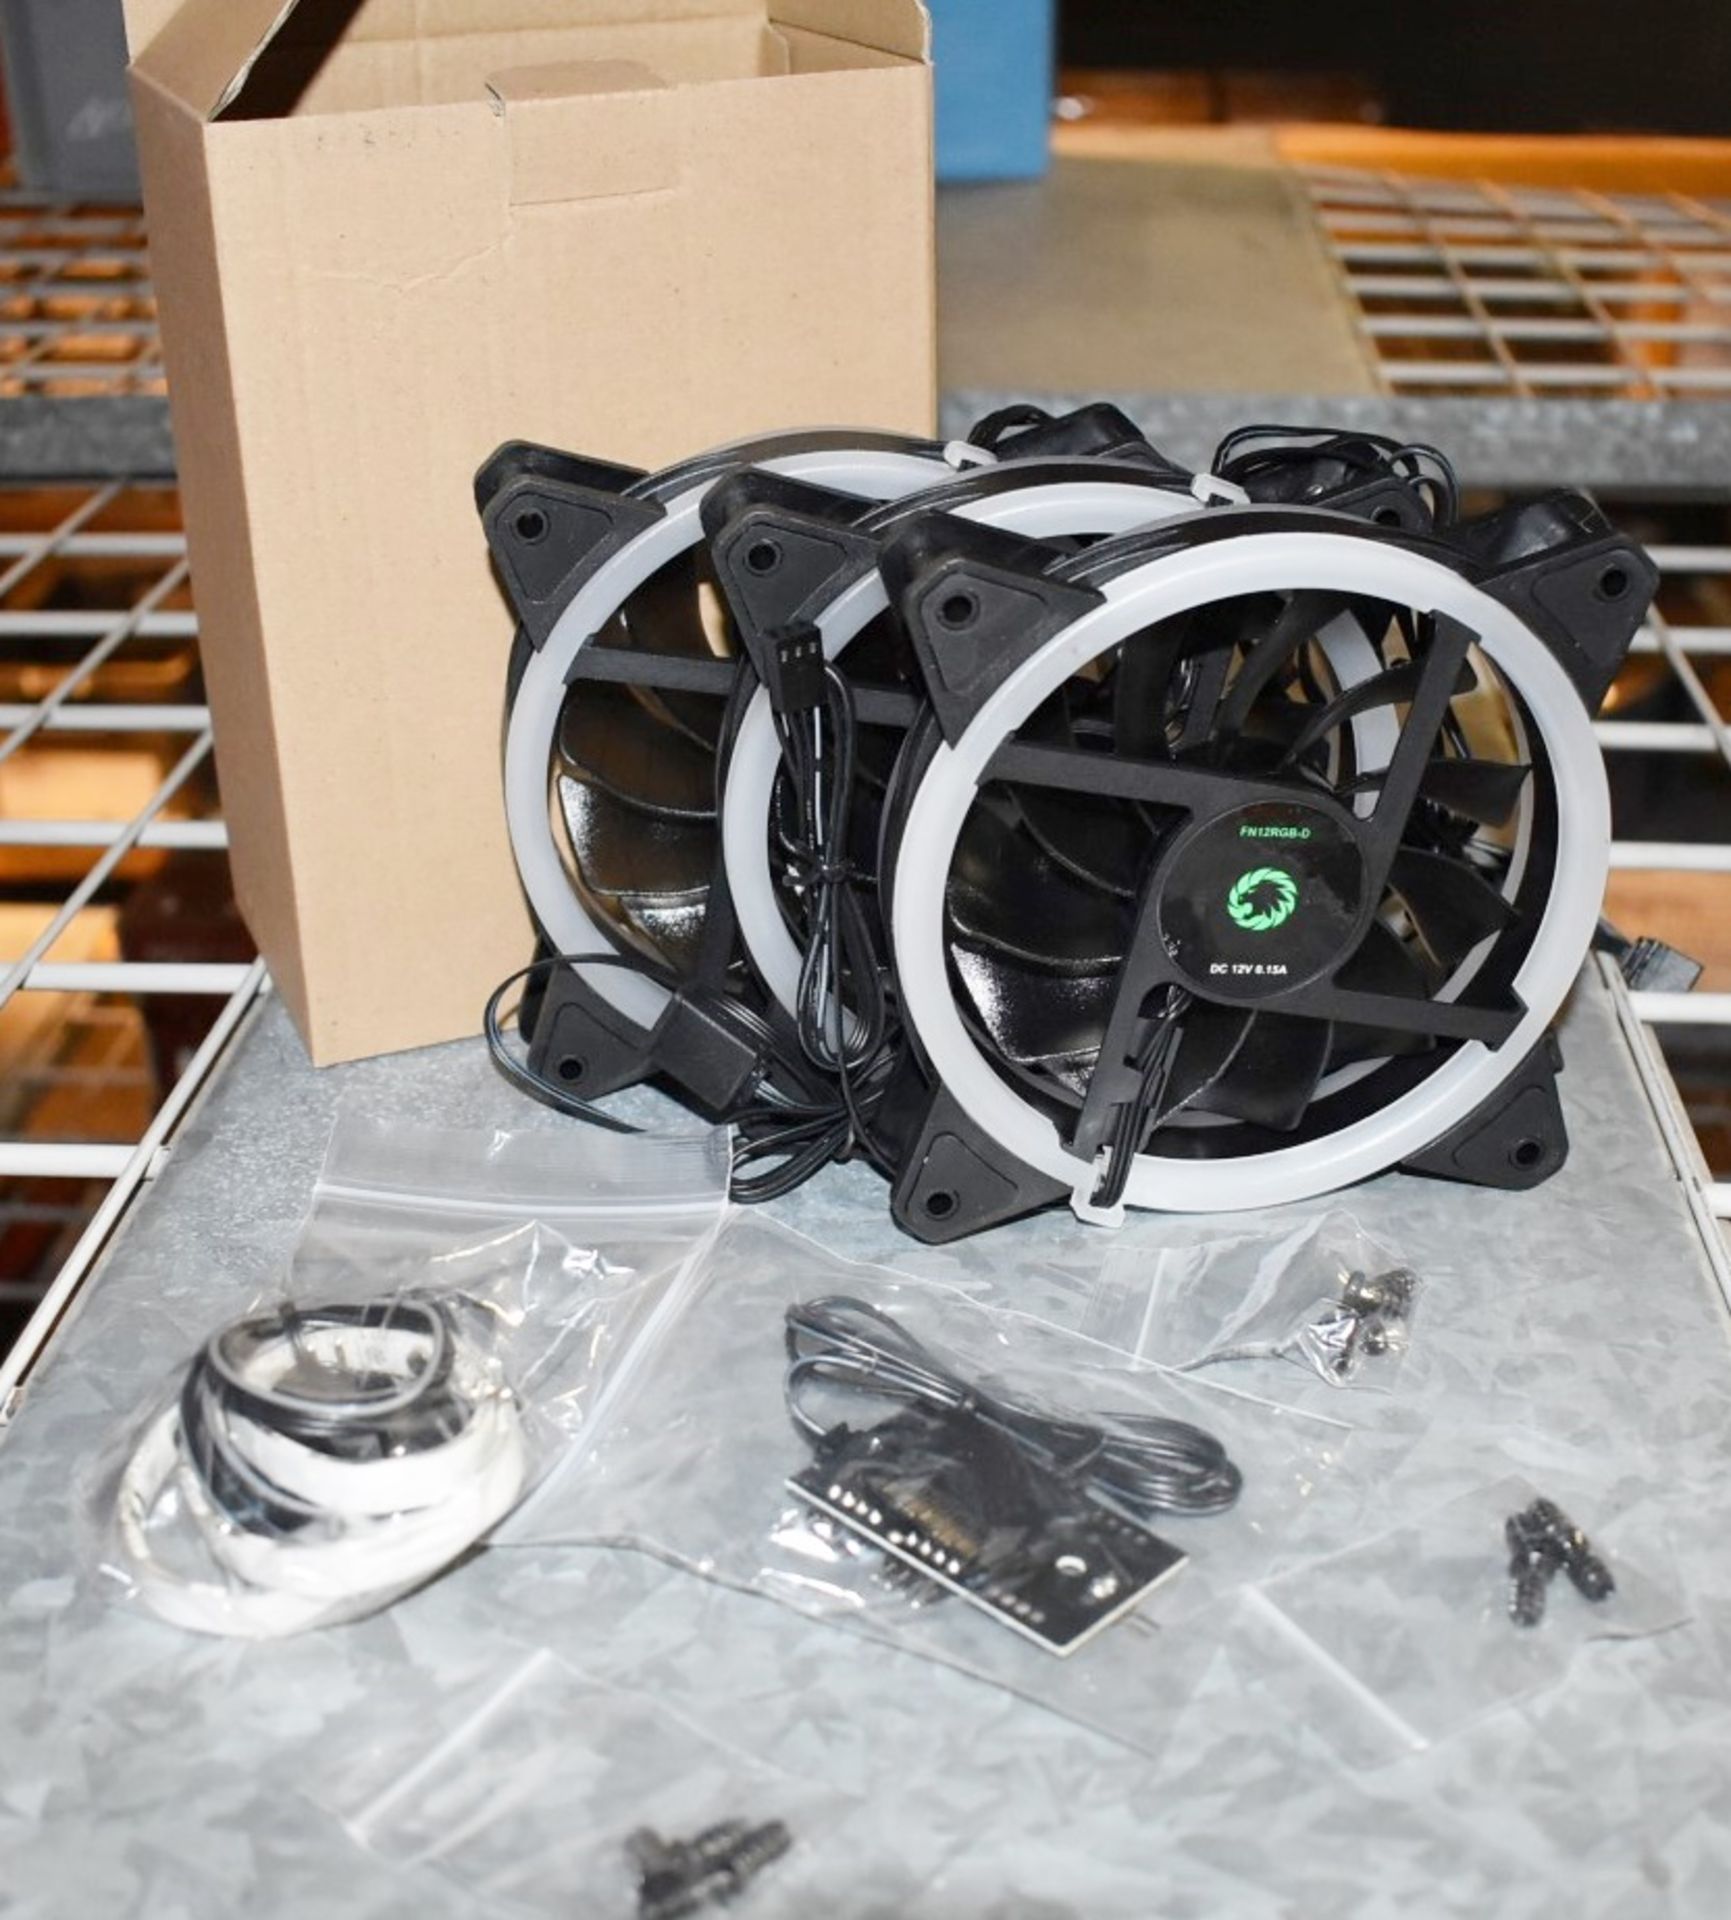 1 x GameMax LED Fan Pack For PC Gaming Cases - Includes 3 x 120mm LED Case Fans, Mounting Screws - Image 5 of 8